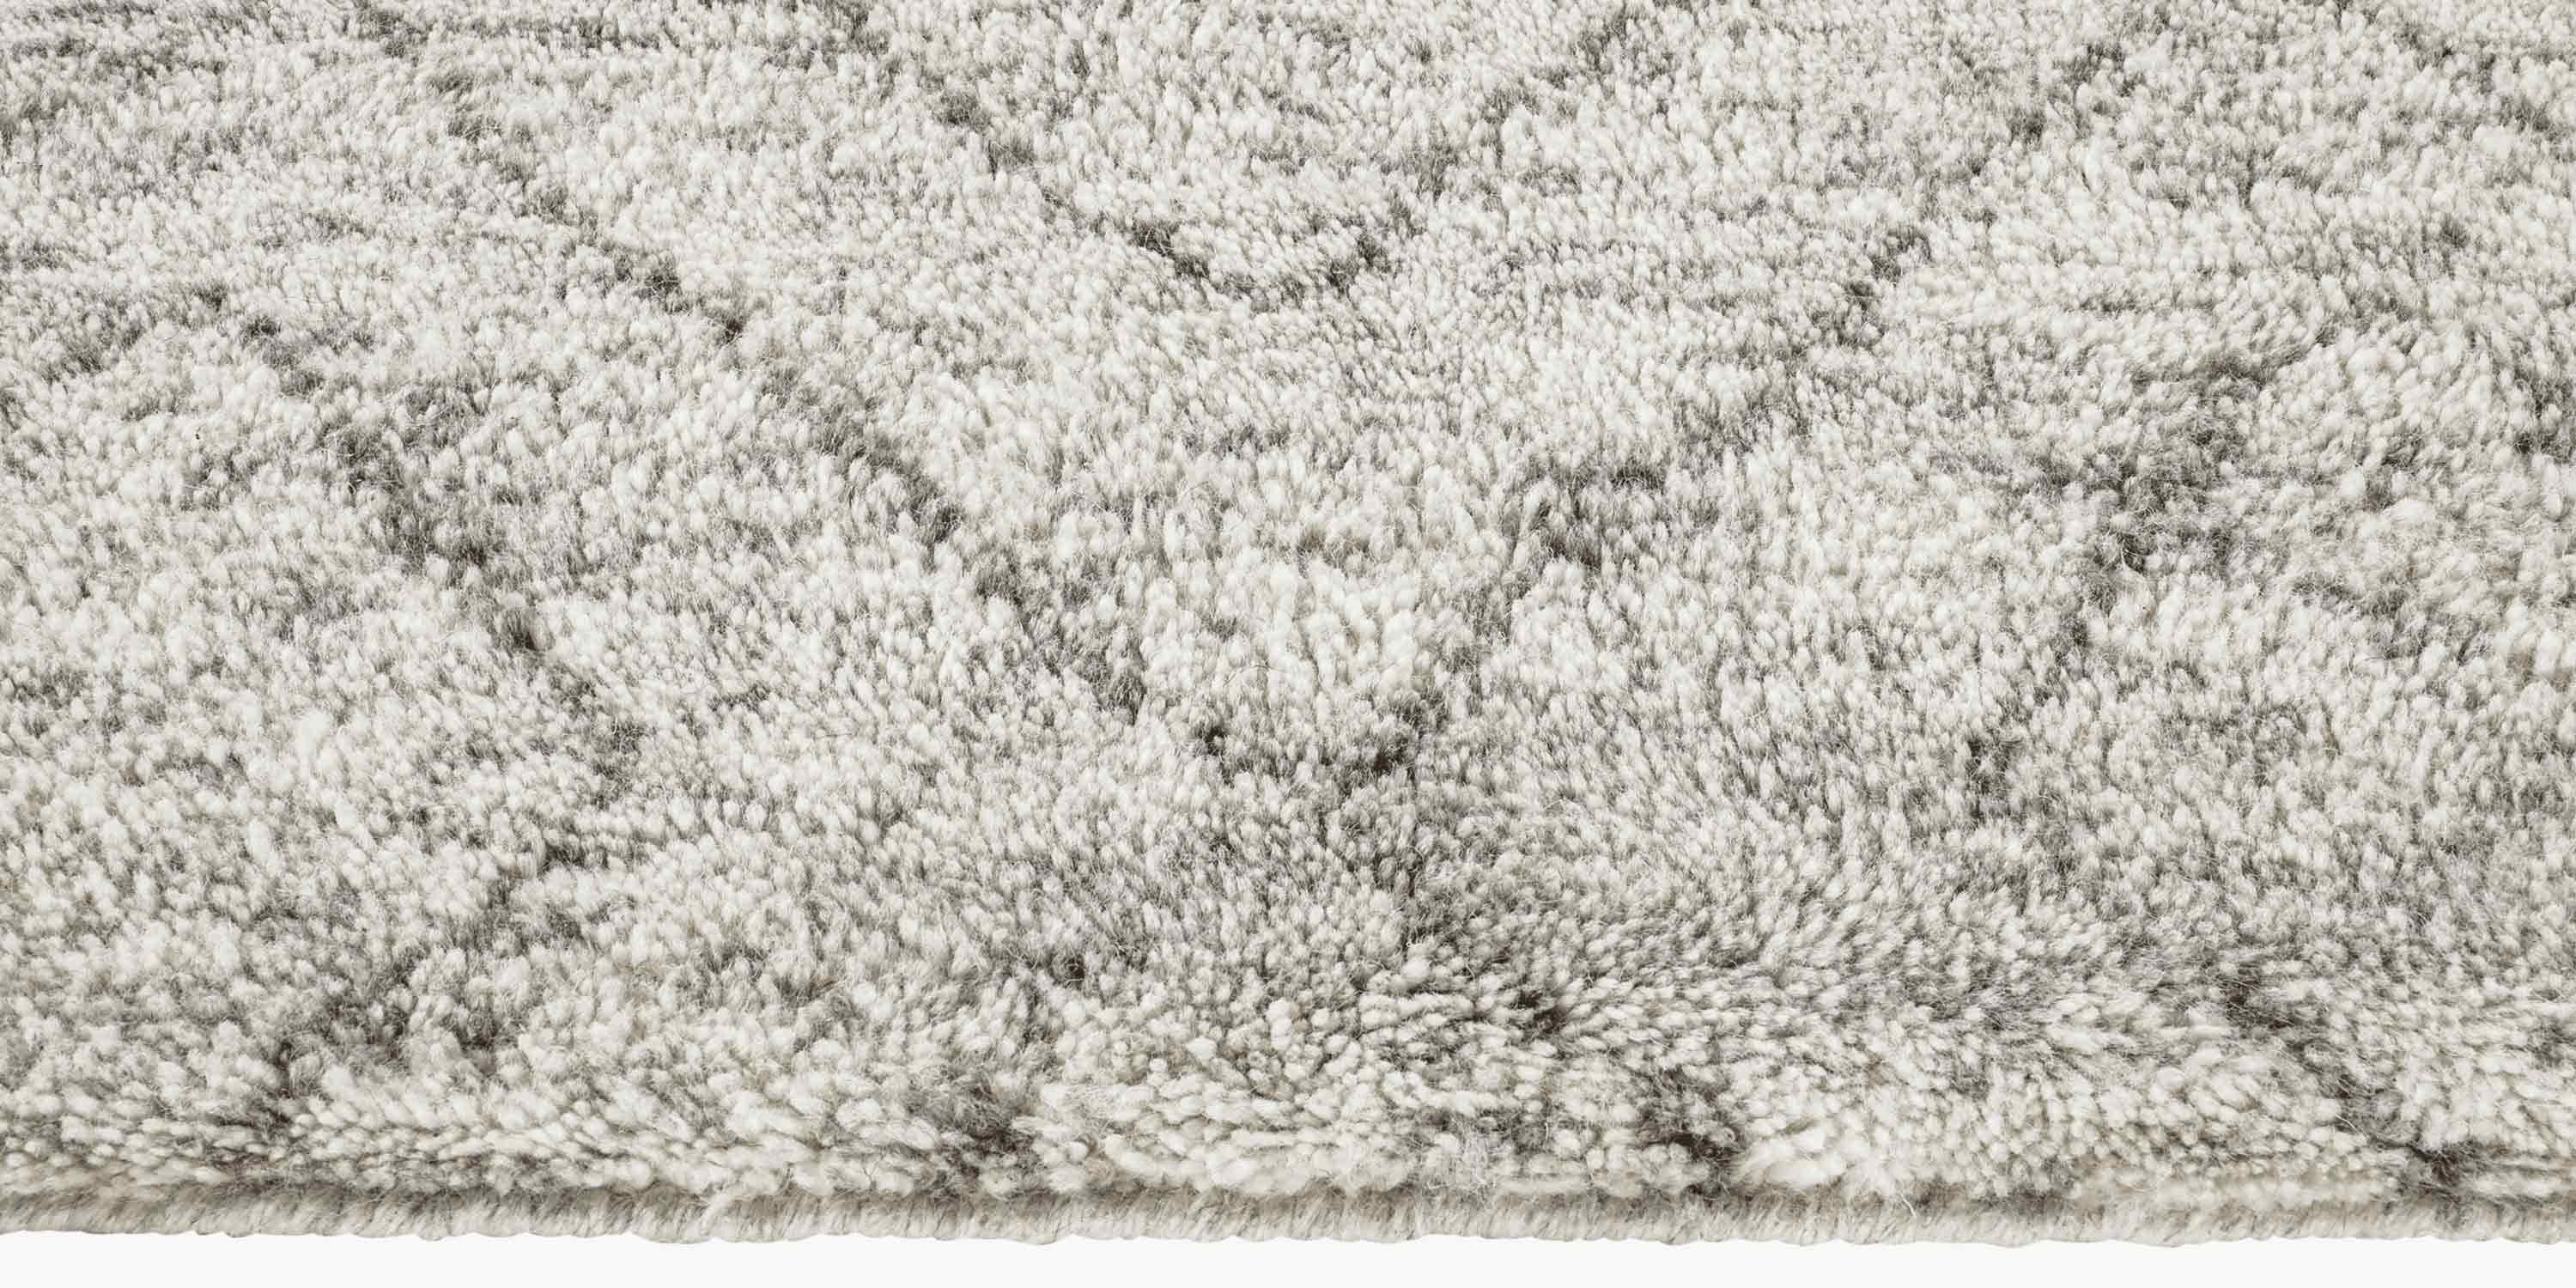 For Sale: Silver Ben Soleimani Double Diamond Rug– Moroccan Hand-knotted Wool Grey 6'x9' 3